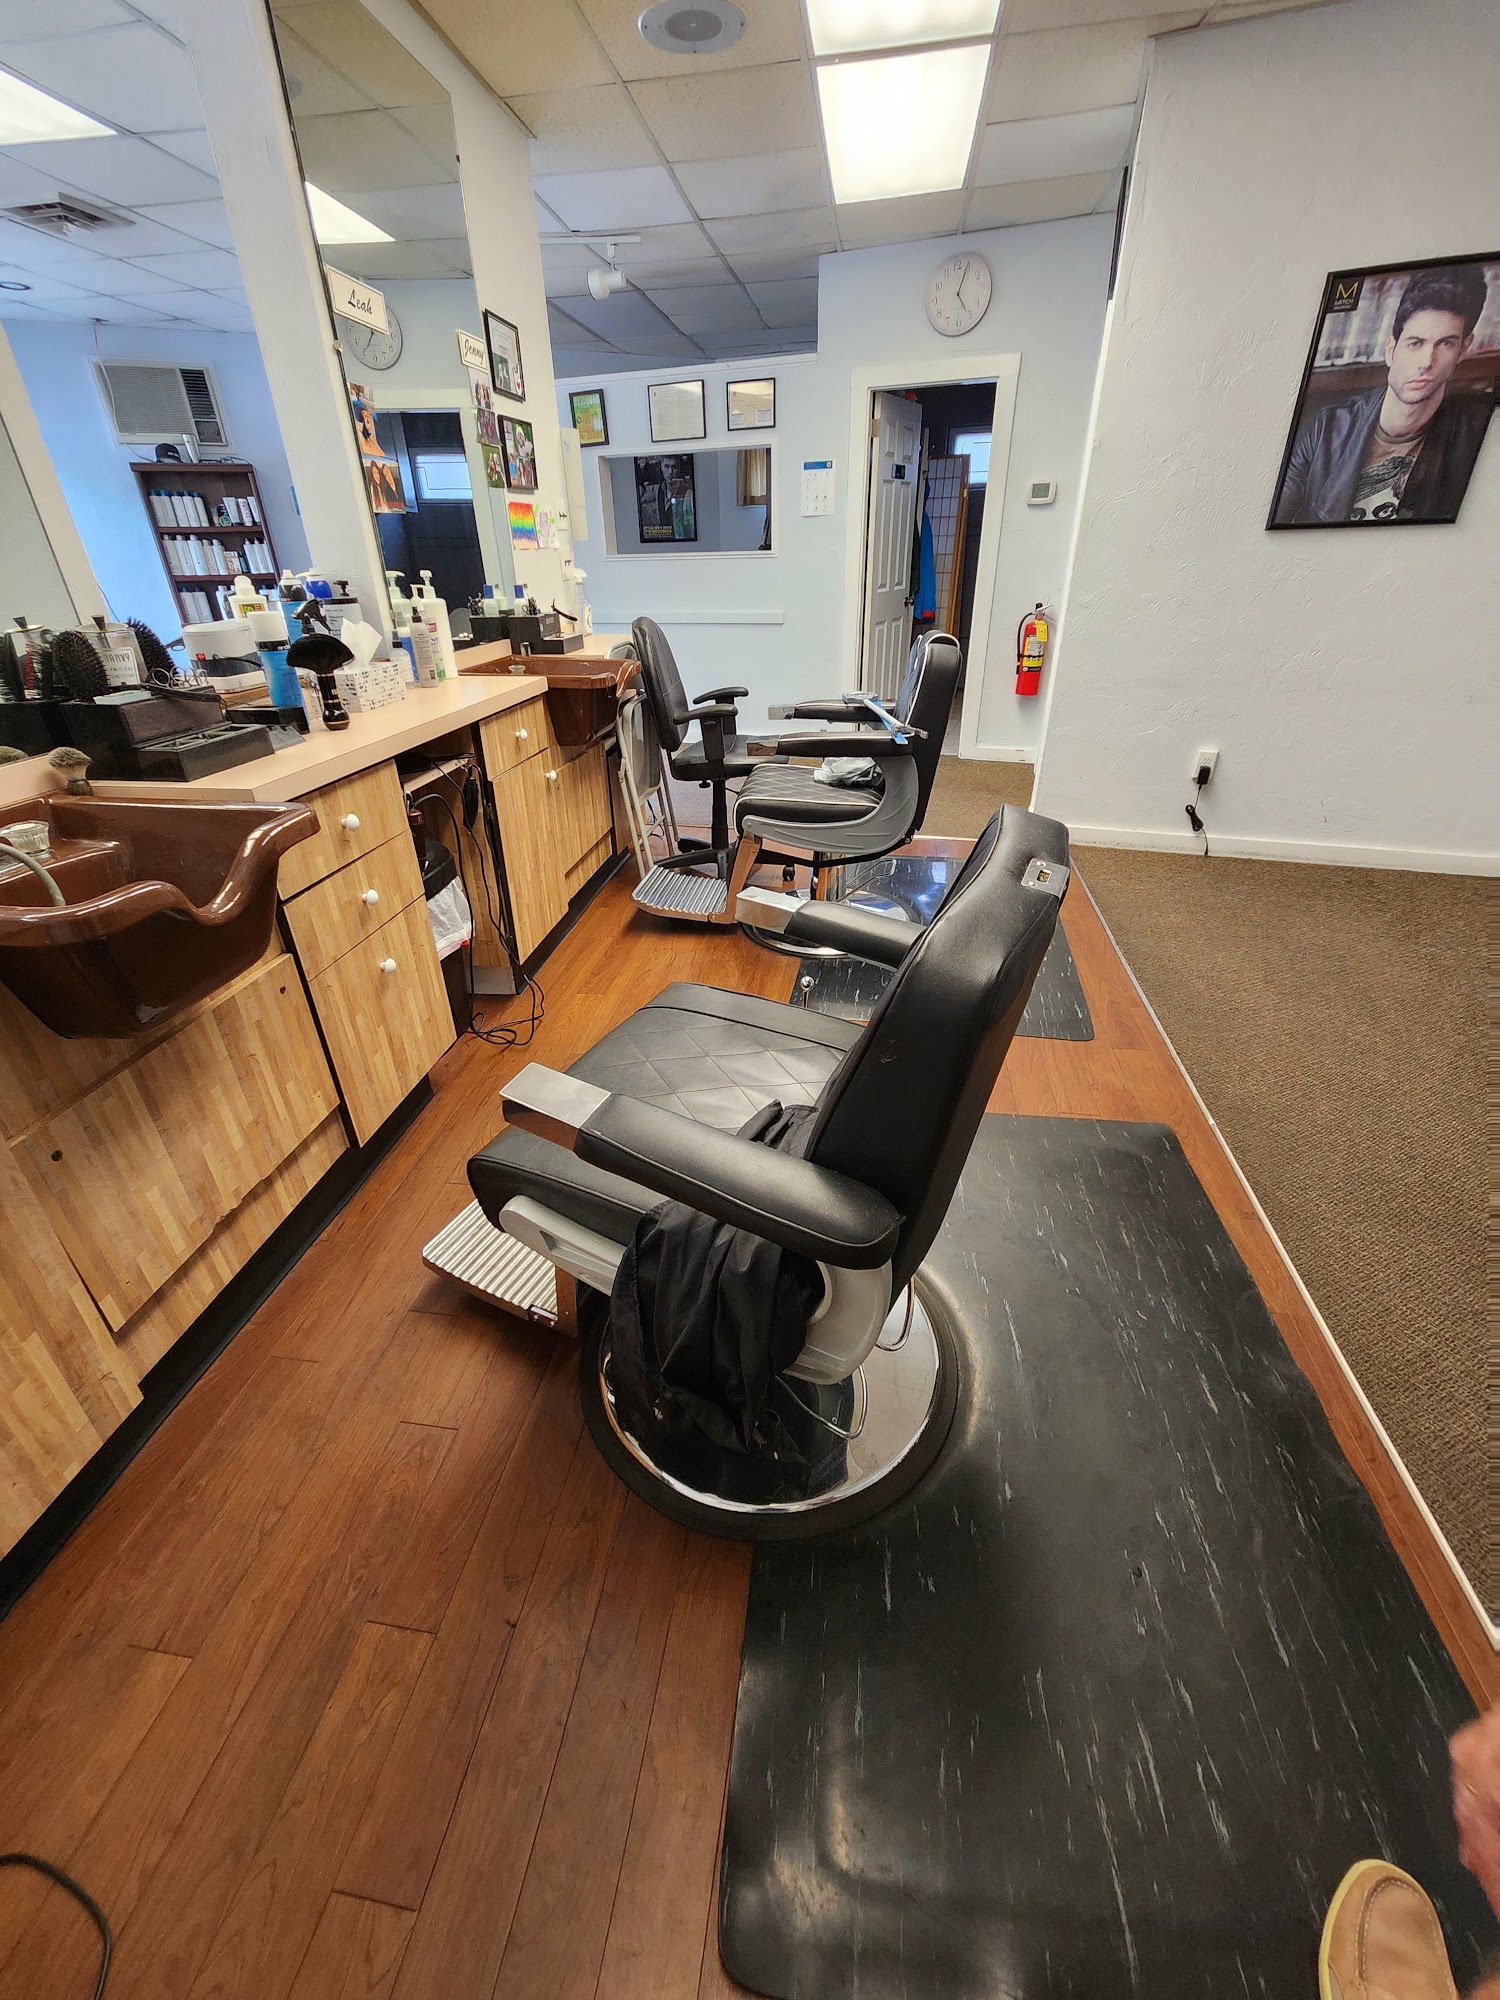 Pat's Barber Shop & Hairstyling 117 Ripley Rd, Cohasset Massachusetts 02025